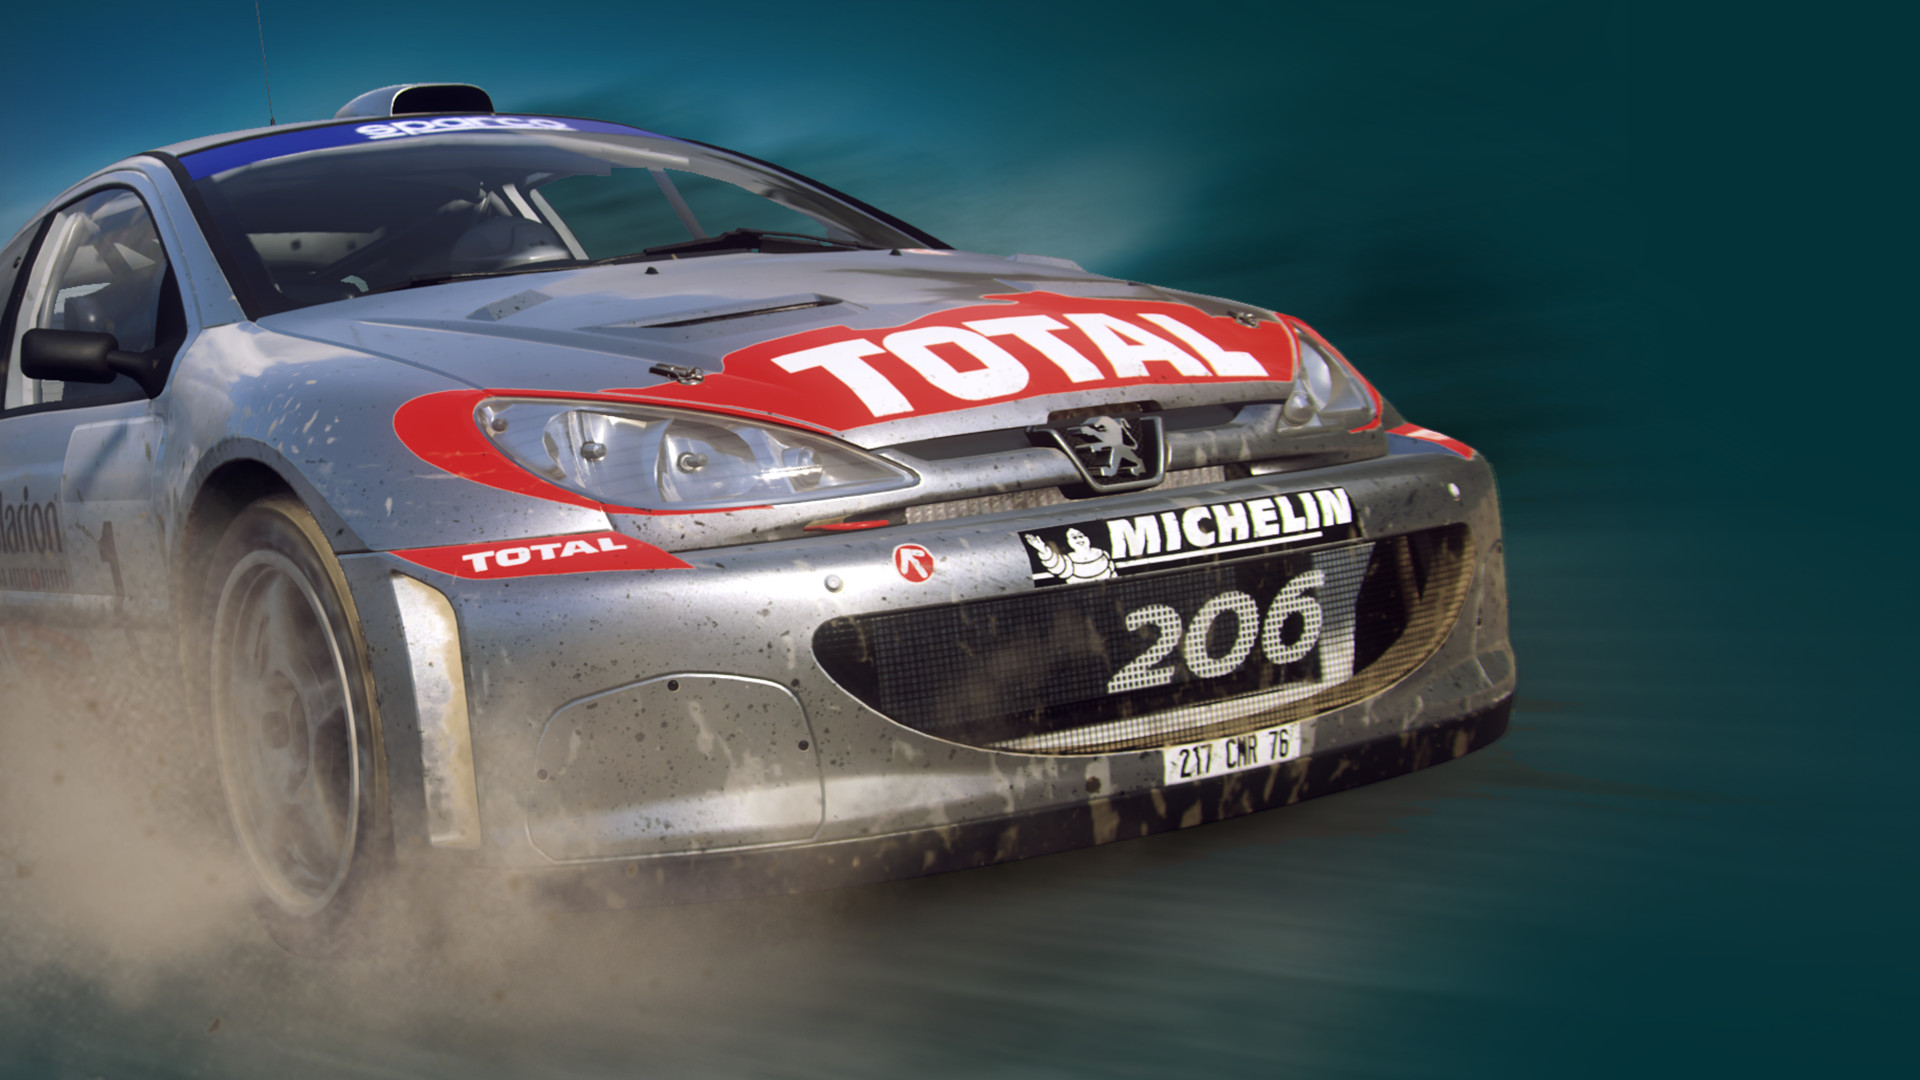 Save 50% on DiRT Rally 2.0 - Peugeot 206 Rally on Steam